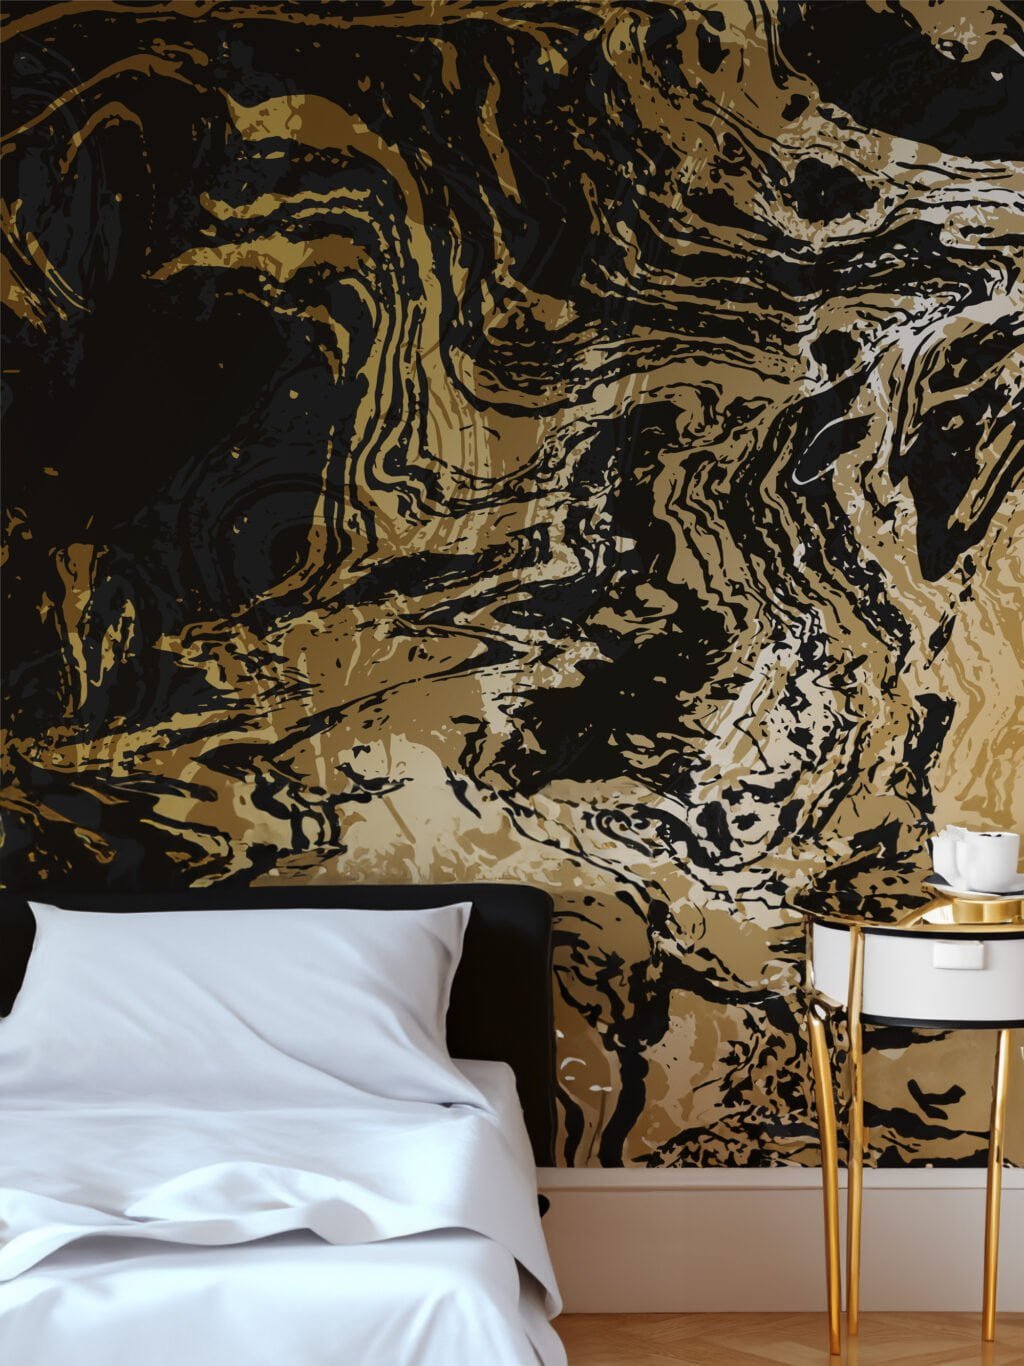 Abstract Gold And Black Marble Illustration Wallpaper, Luxury Peel & Stick Wall Mural